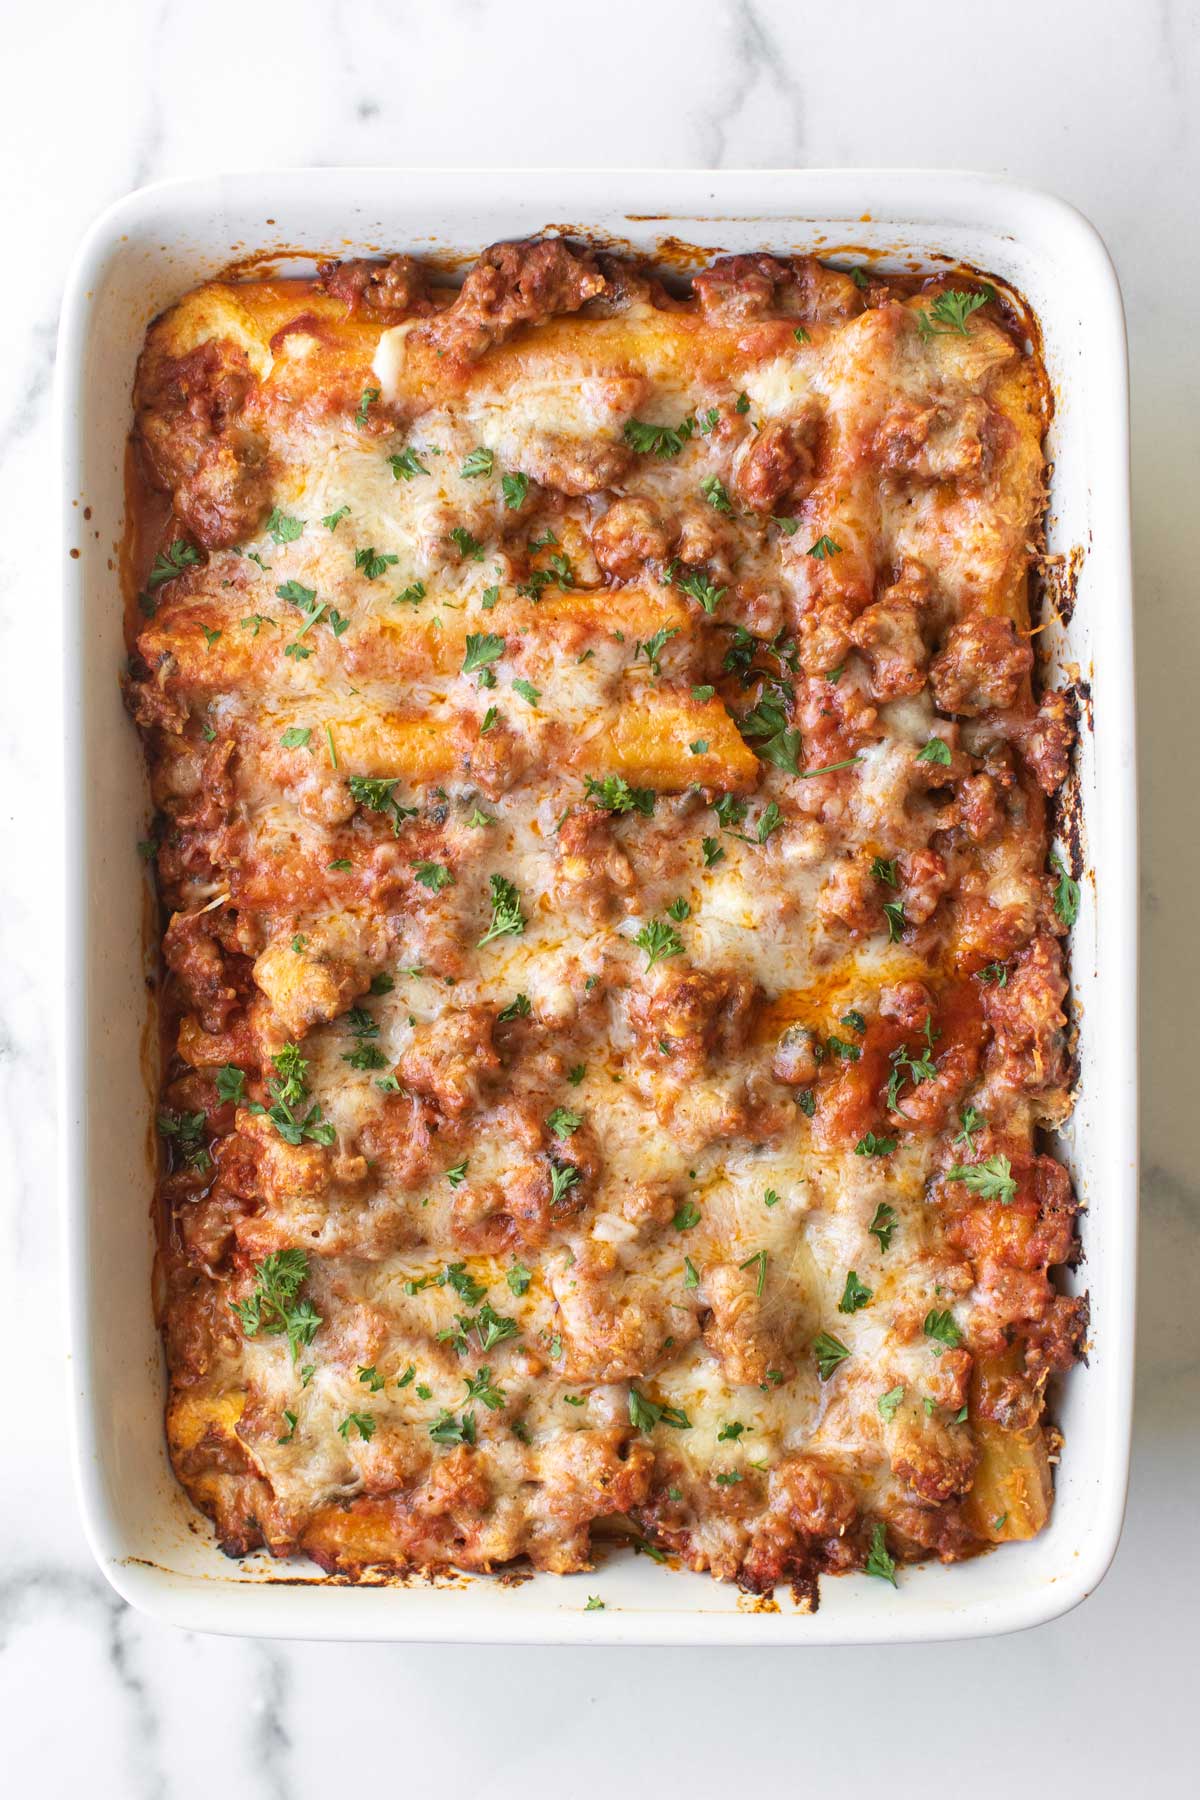 the baked cheese manicotti in a pan.